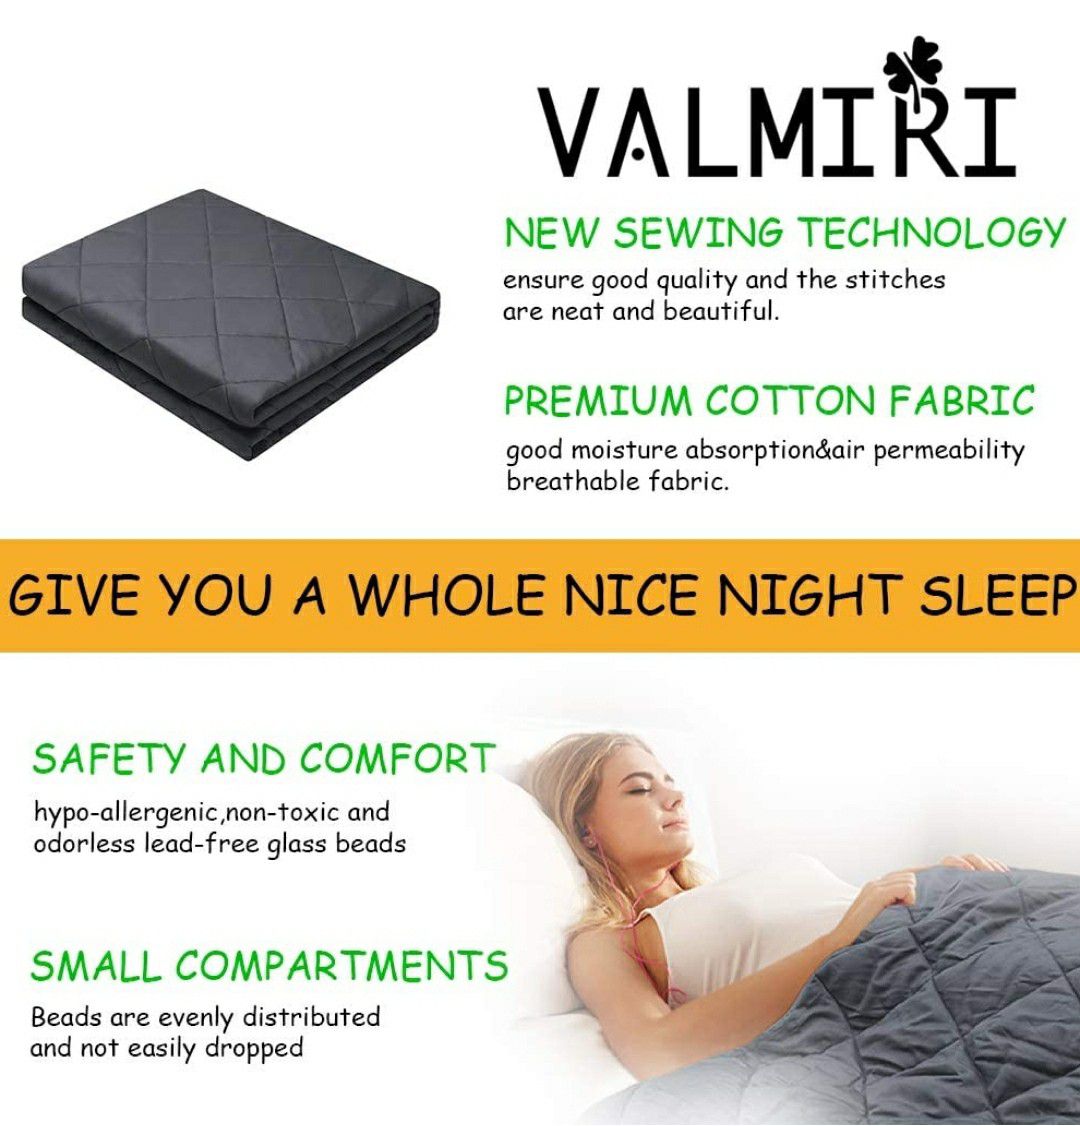 VALMIRI Weighted Blanket 60" x 80" 15 lbs - Queen Size 100% Organic Cotton with Glass Beads Heavy Blanket Provide Comfortable Sleep Quality, Gray